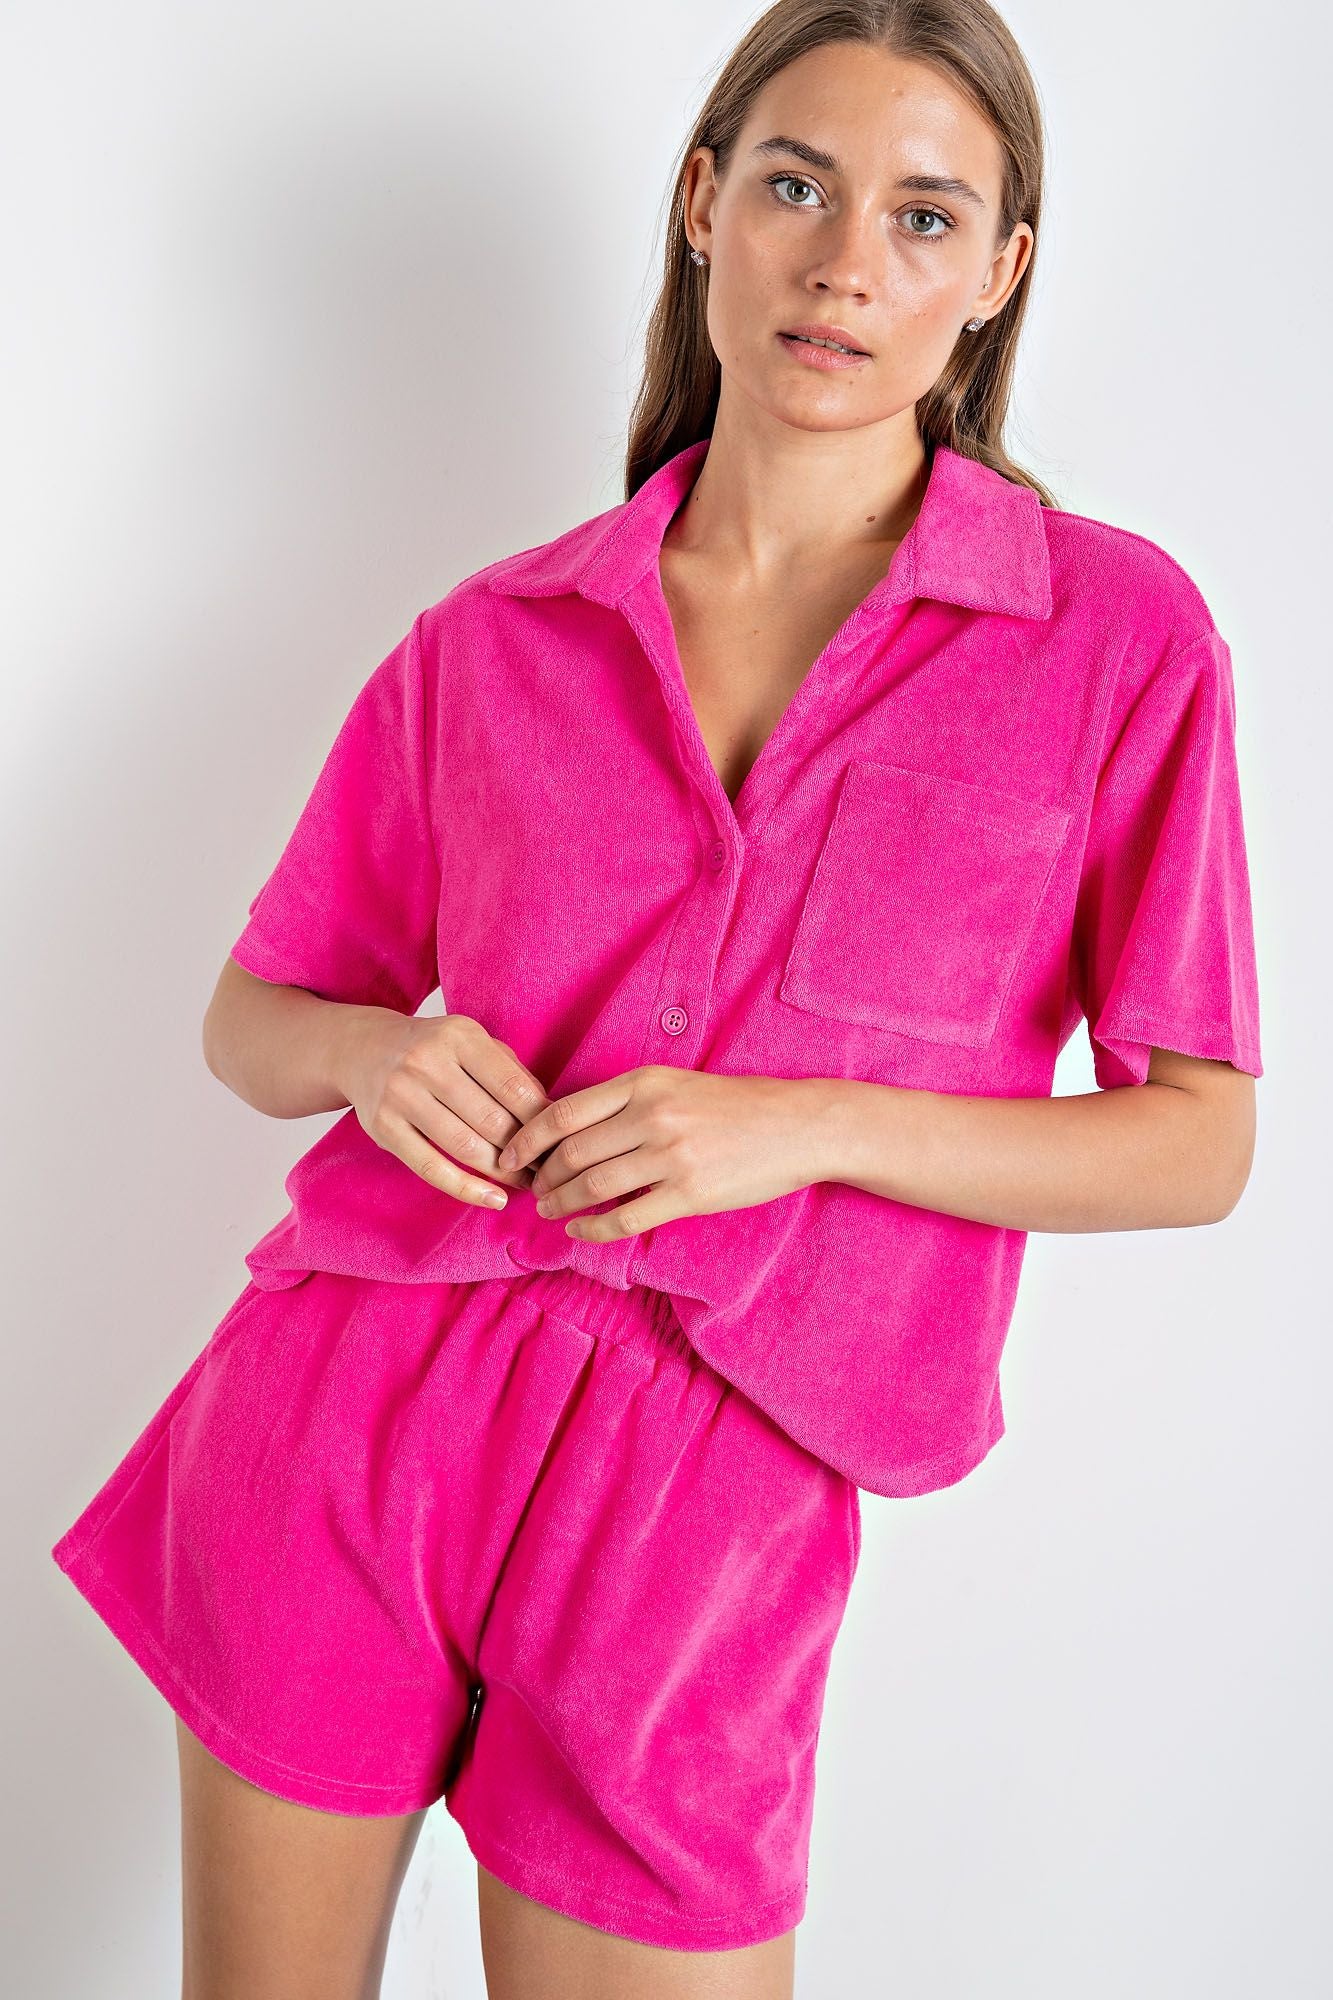 Button Down Short Sleeve Terry Towel Shirt in 3 Colors